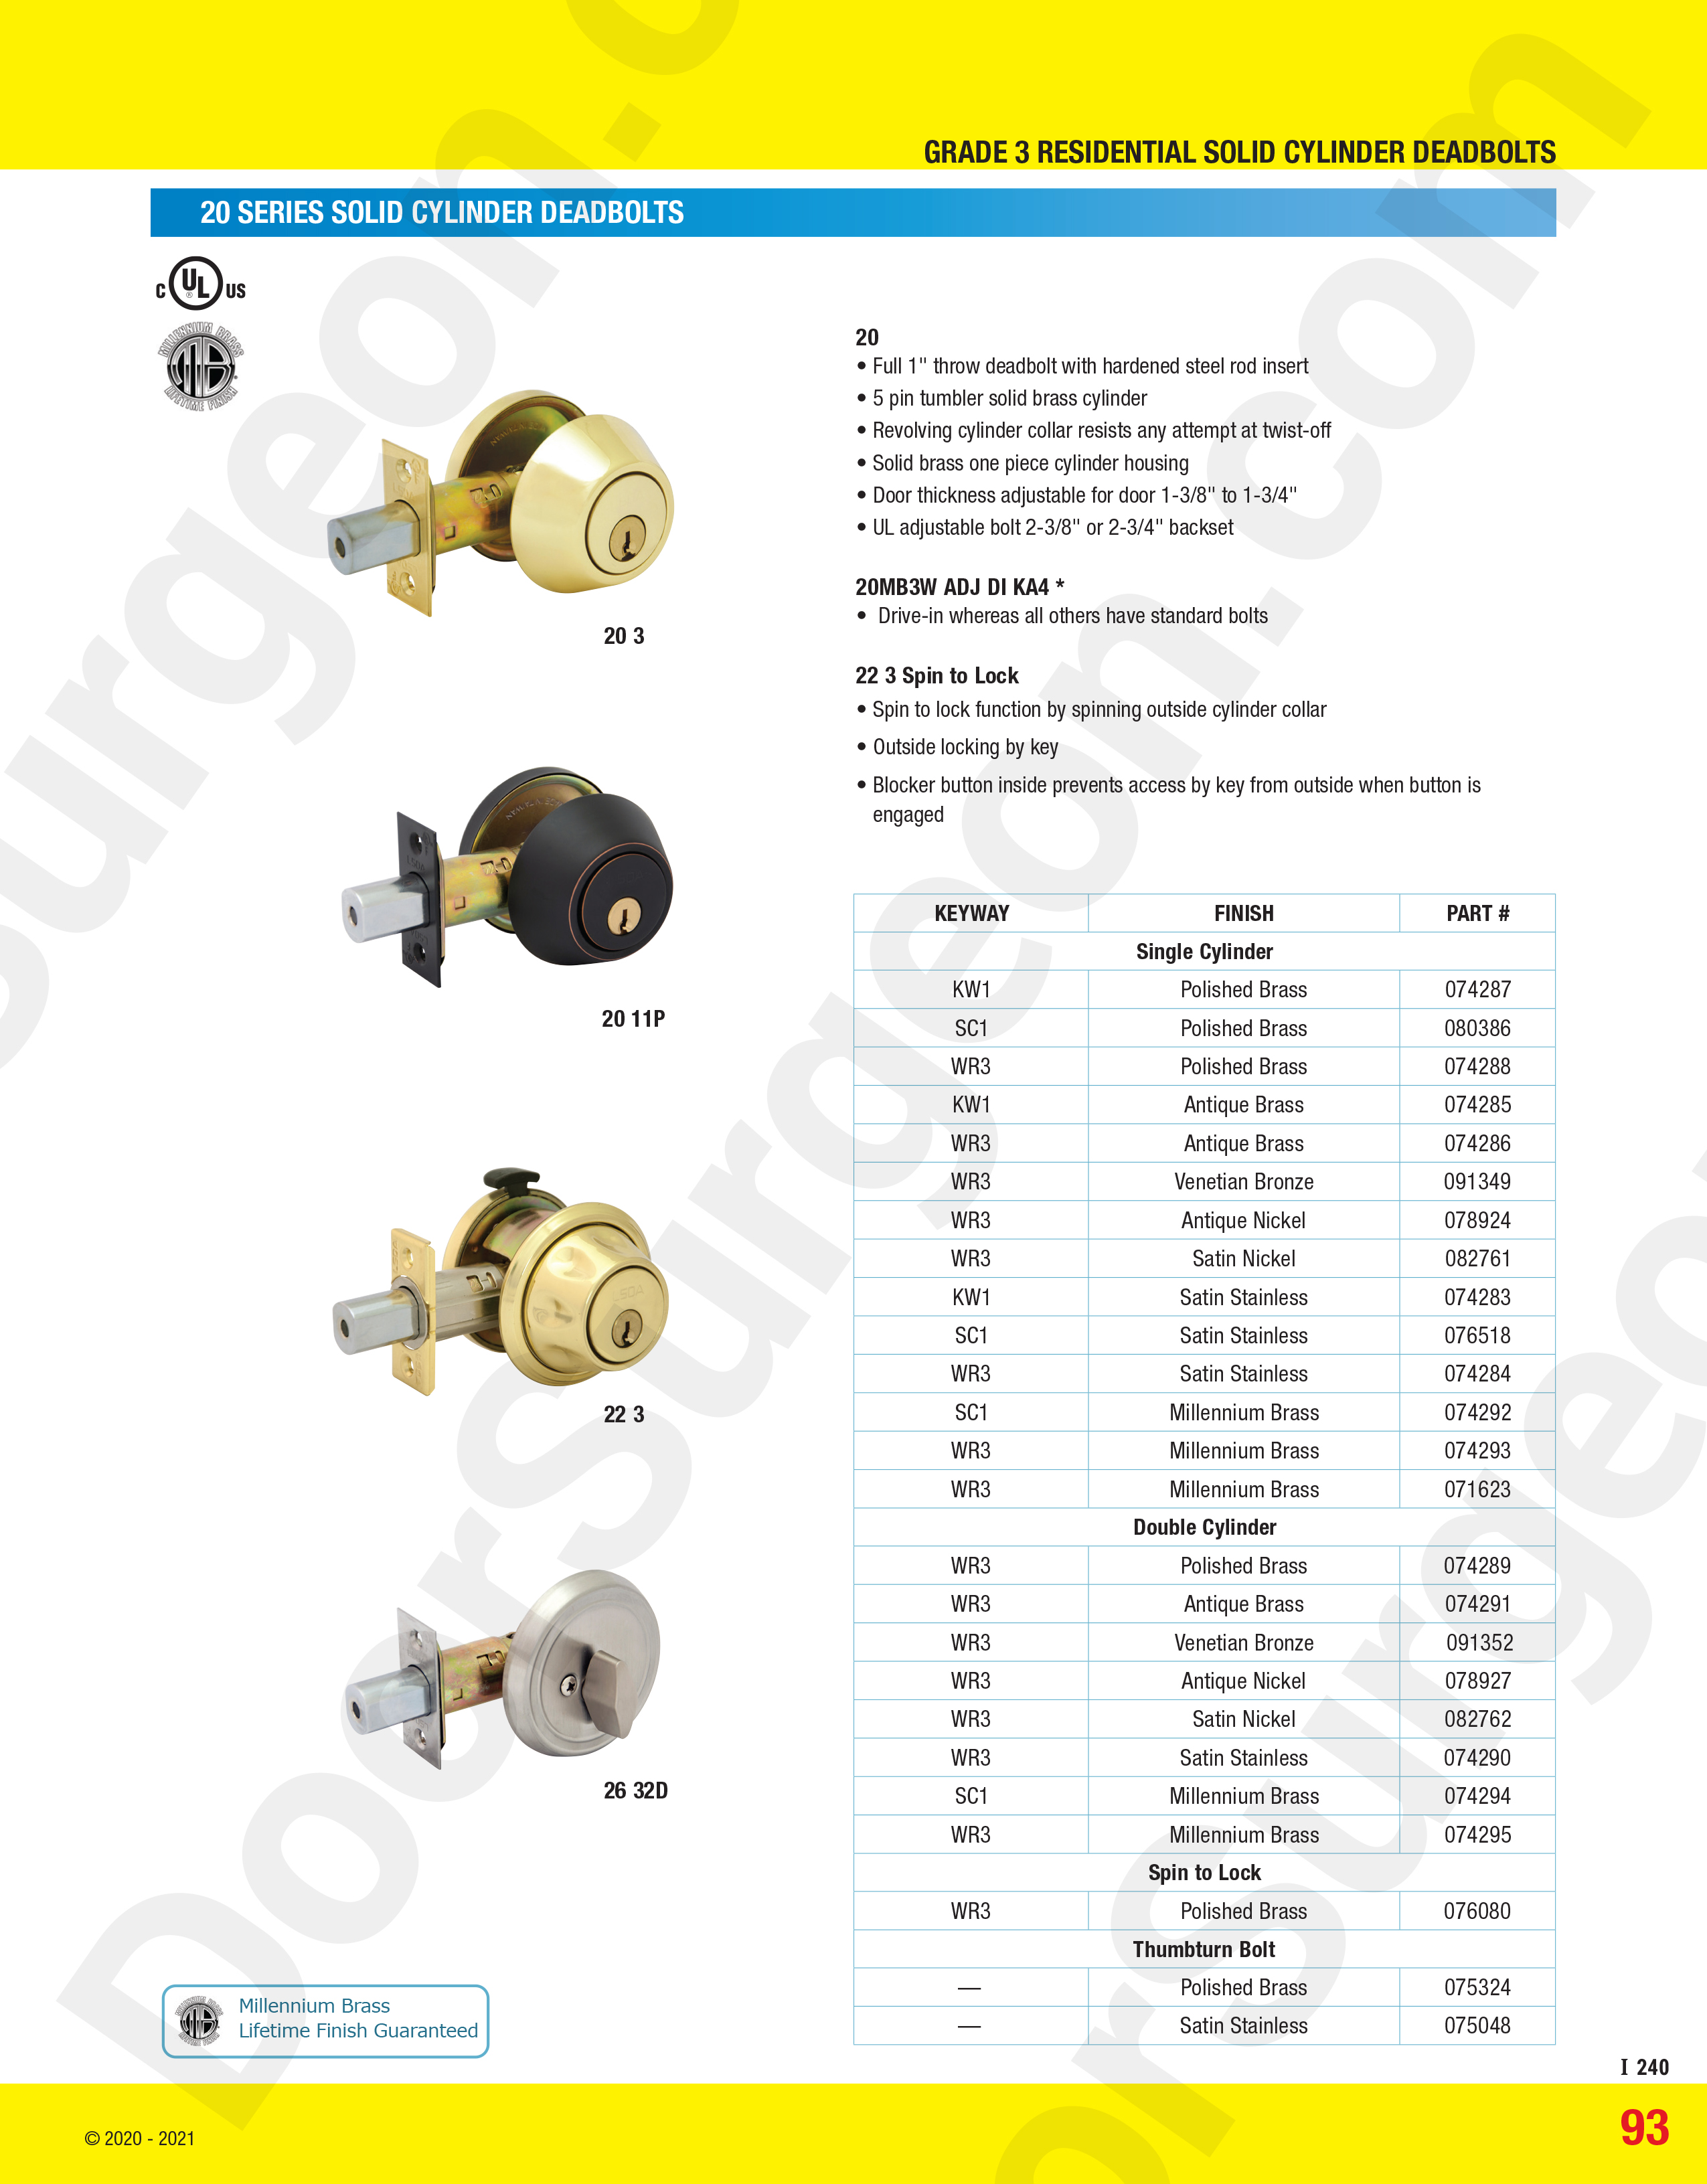 top of grade deadbolts single-sided cylindar or double-sided cylinders.